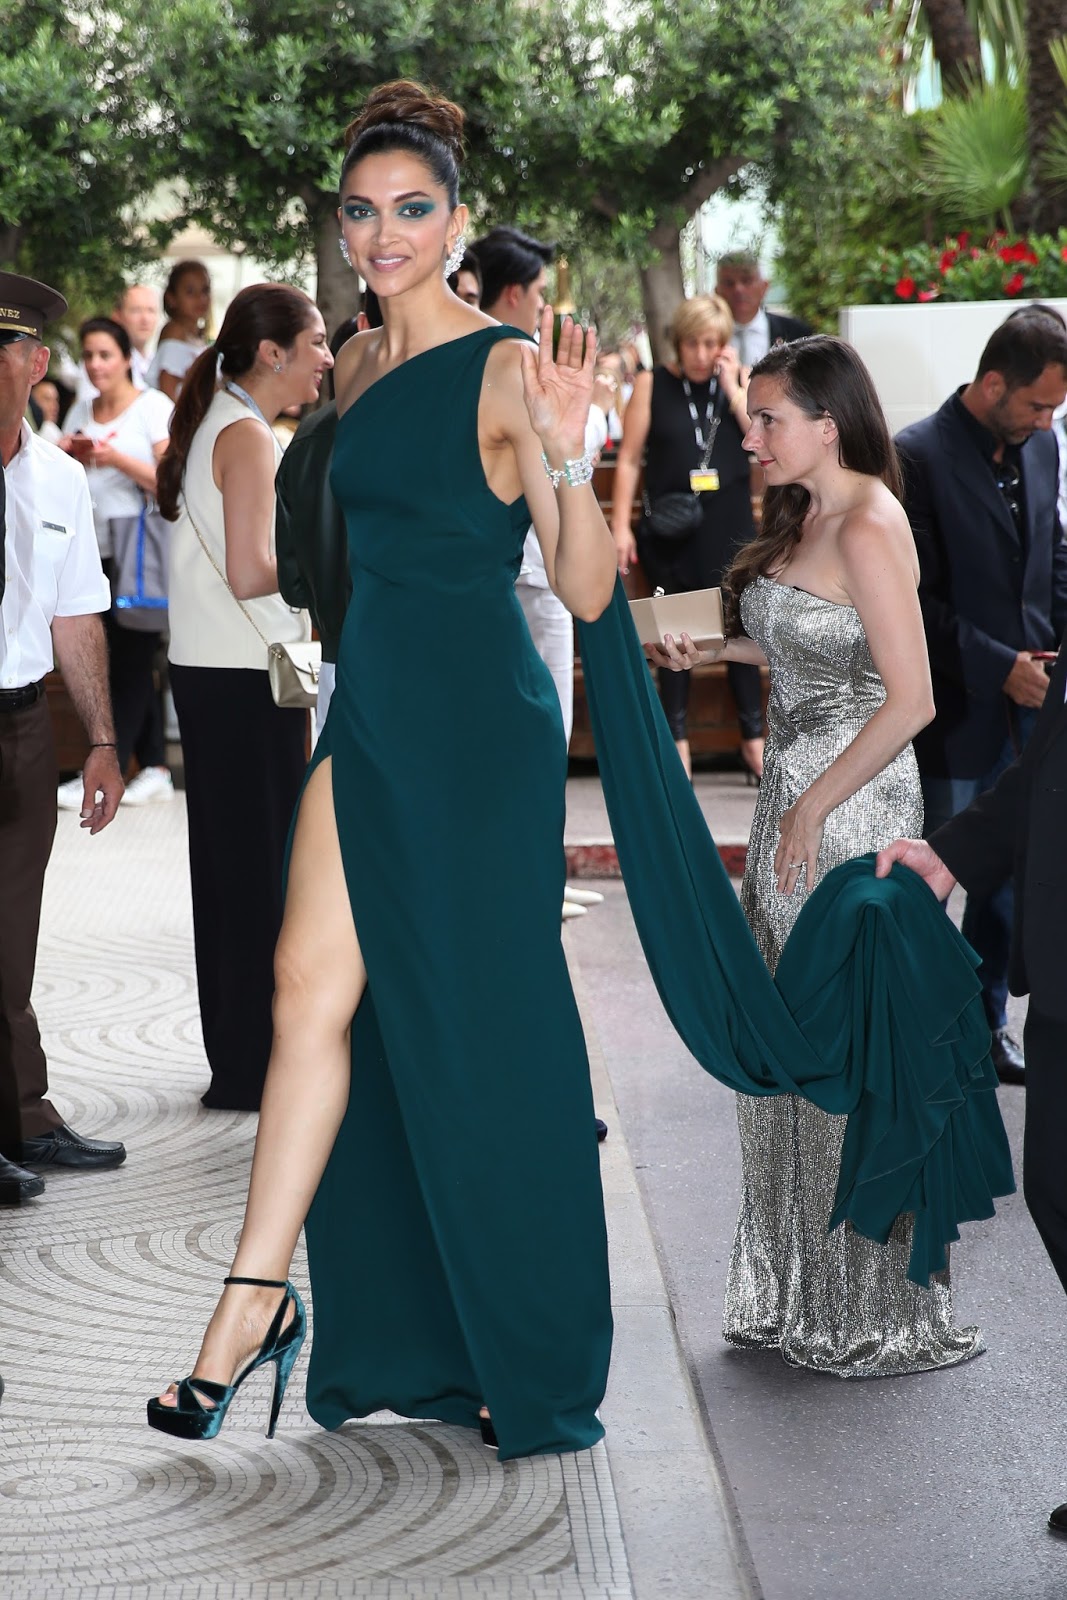 Deepika Padukone Irresistibly Sexy in a Green Brandon Maxwell Gown At 'Loveless (Nelyubov)' Premiere During The 70th Cannes Film Festival 2017